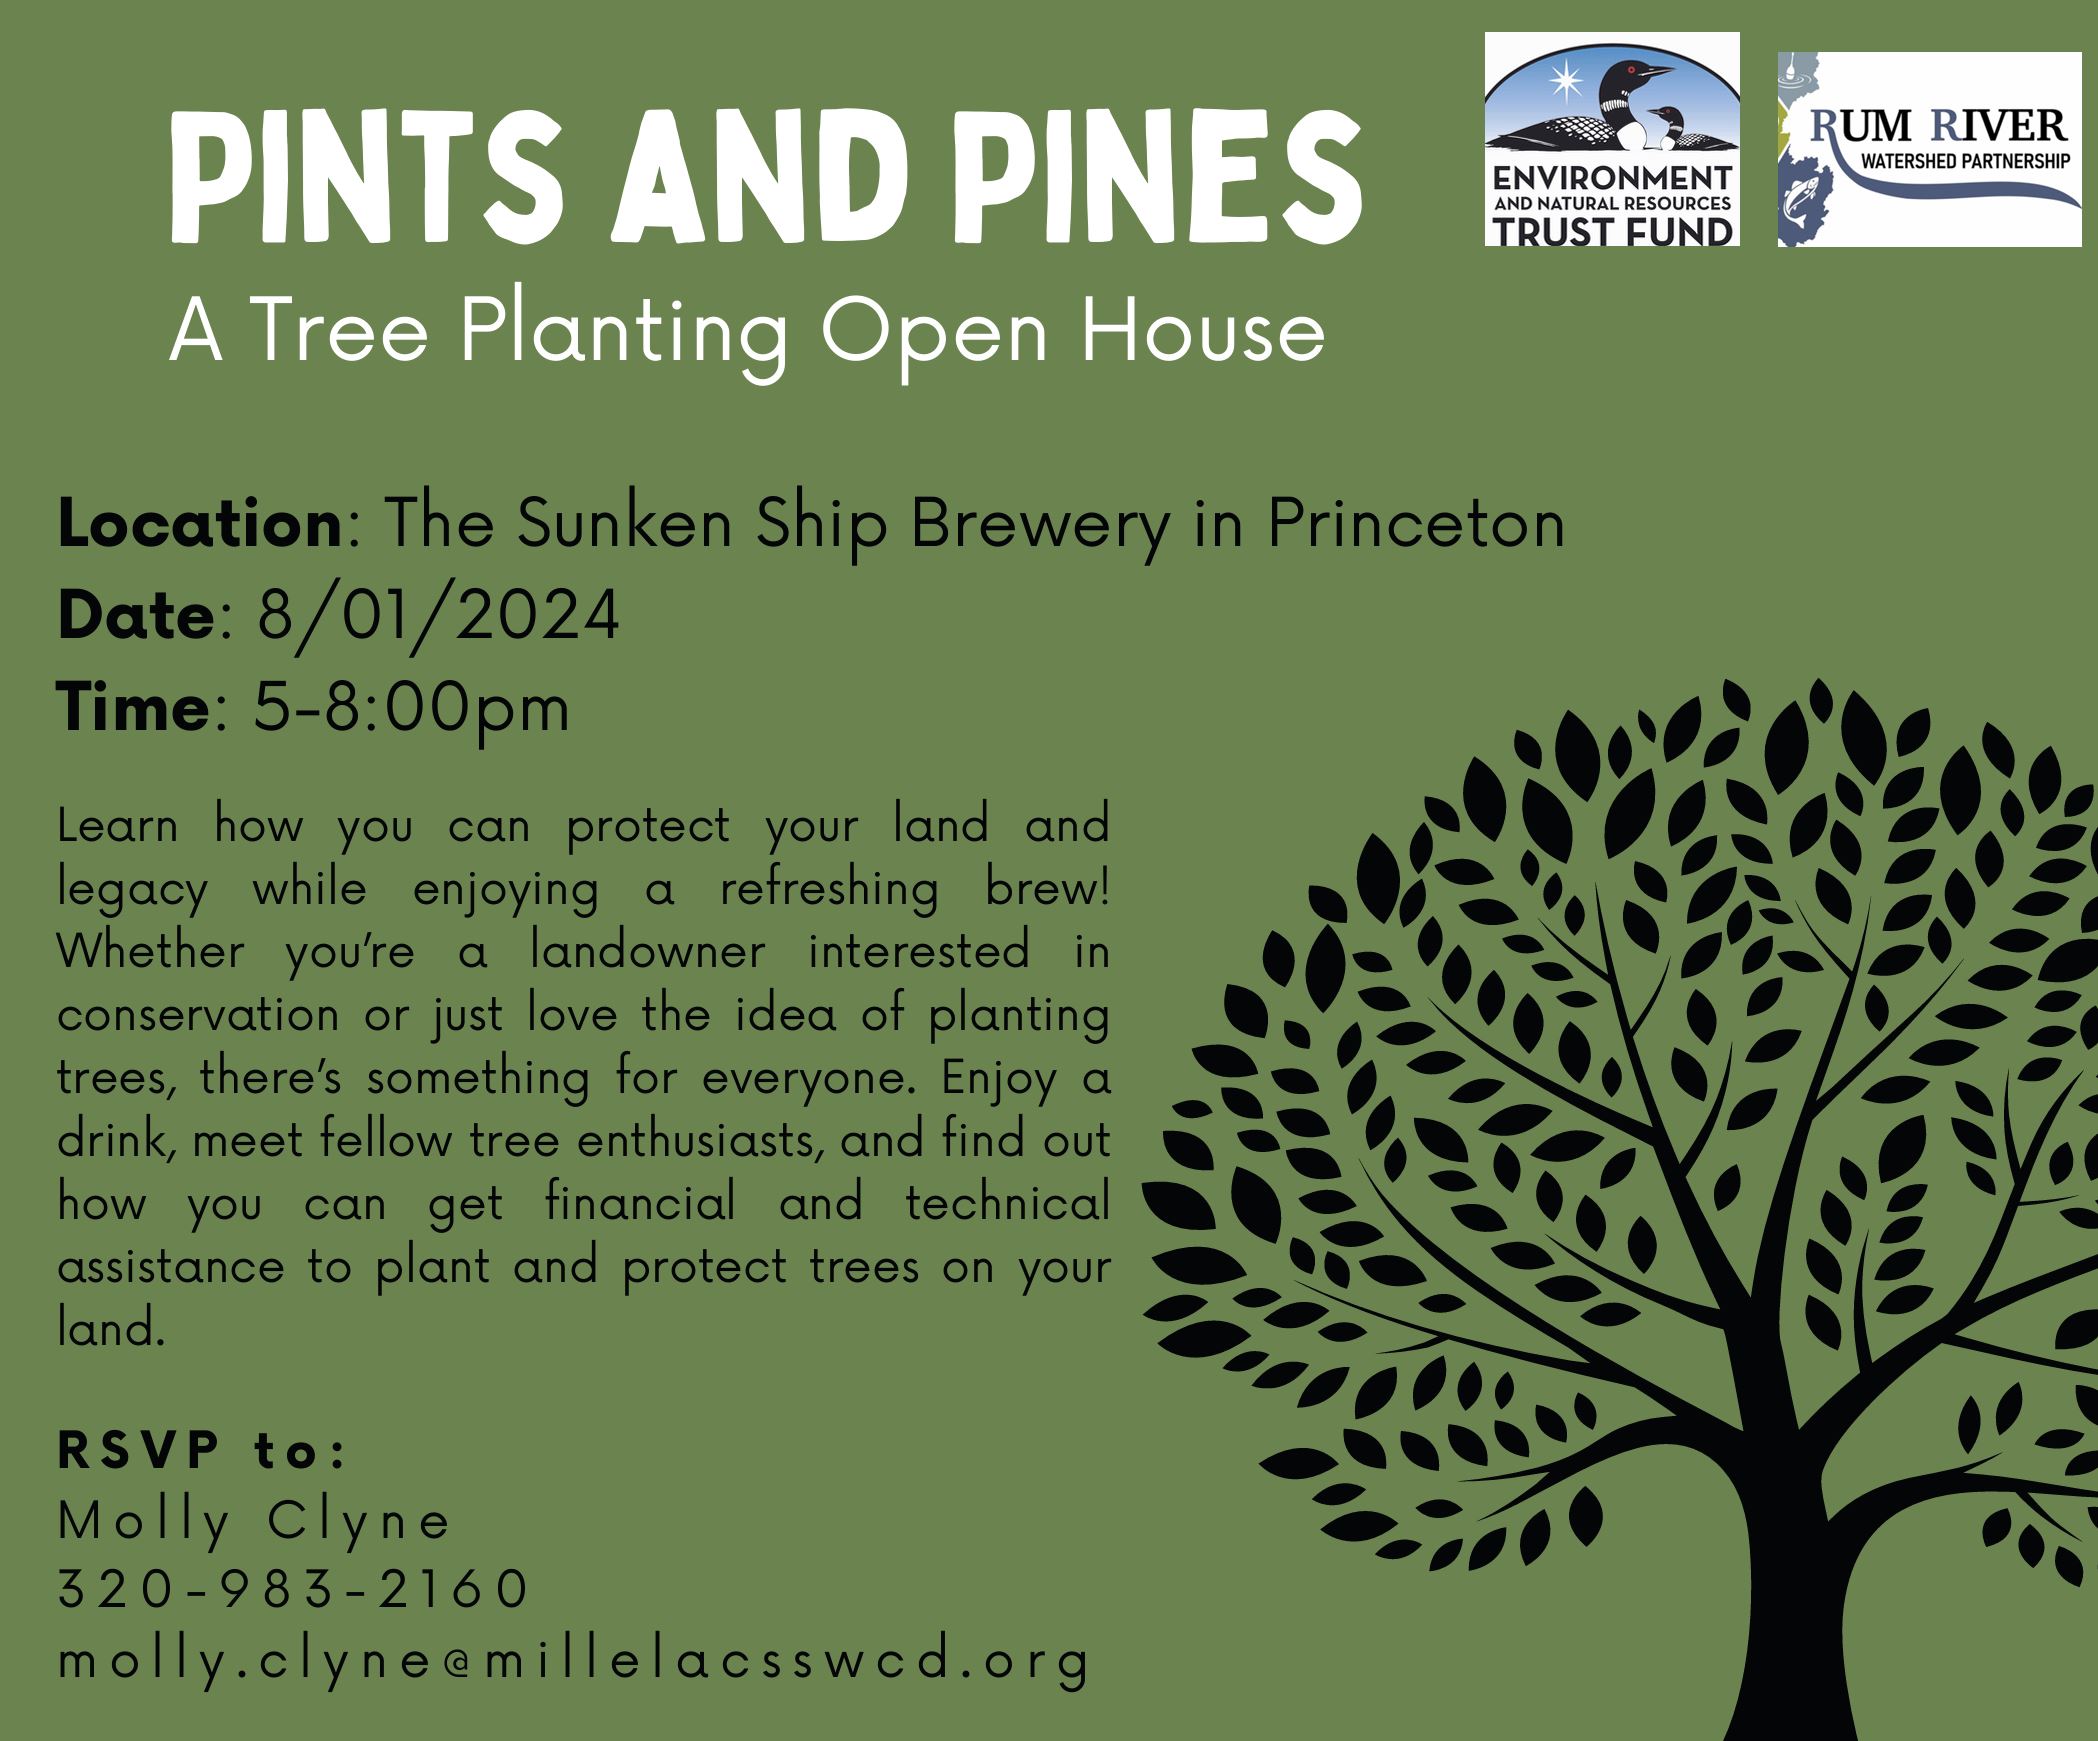 Pints and Pines Social Media Graphic